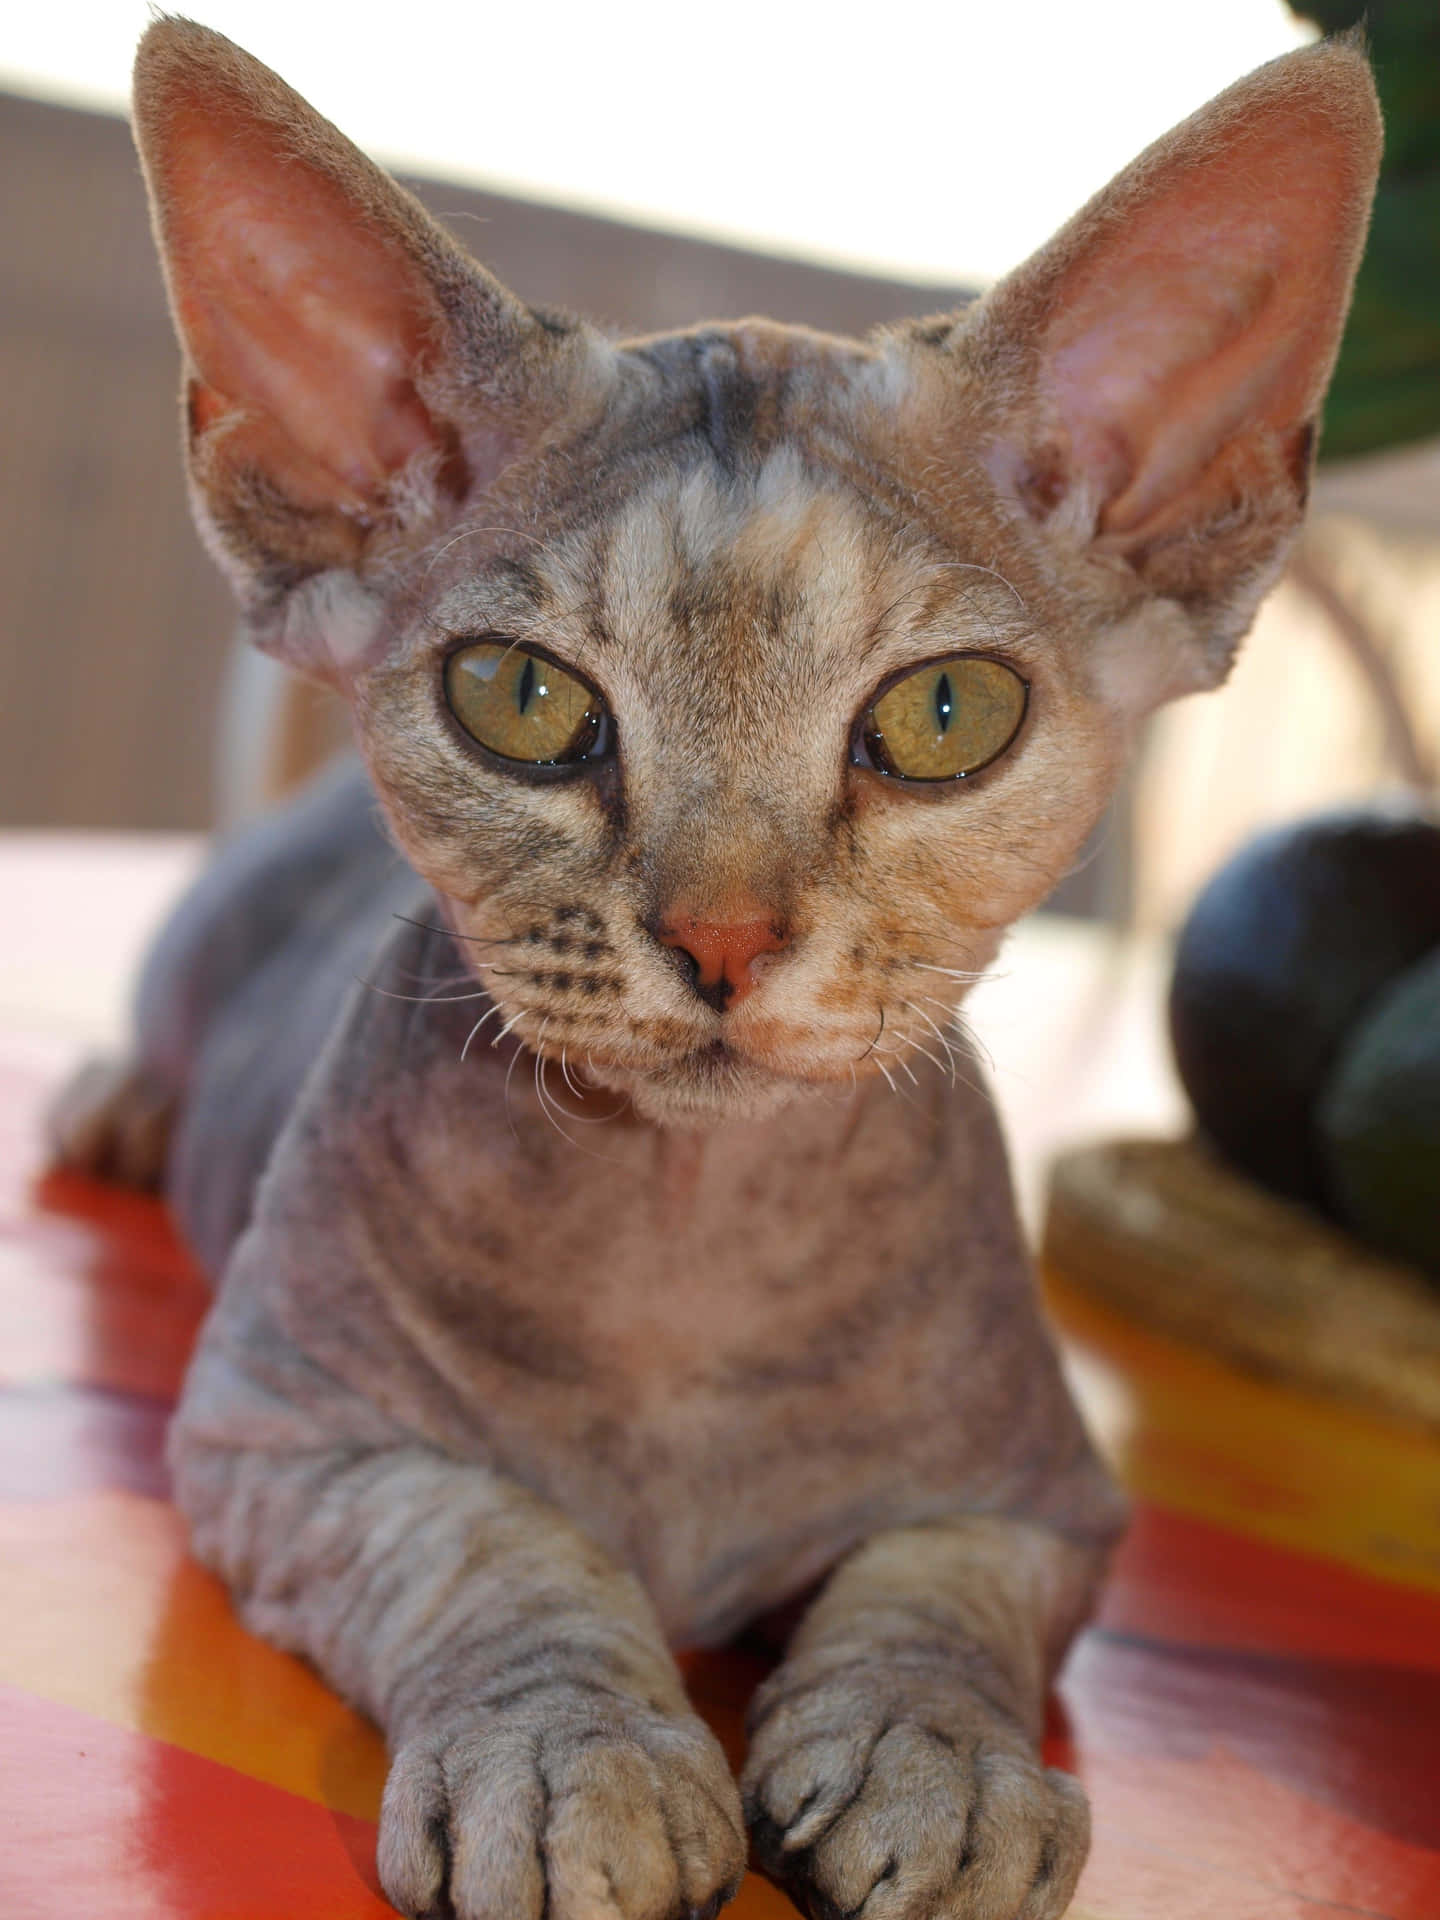 Adorable Devon Rex cat relaxing on a couch Wallpaper